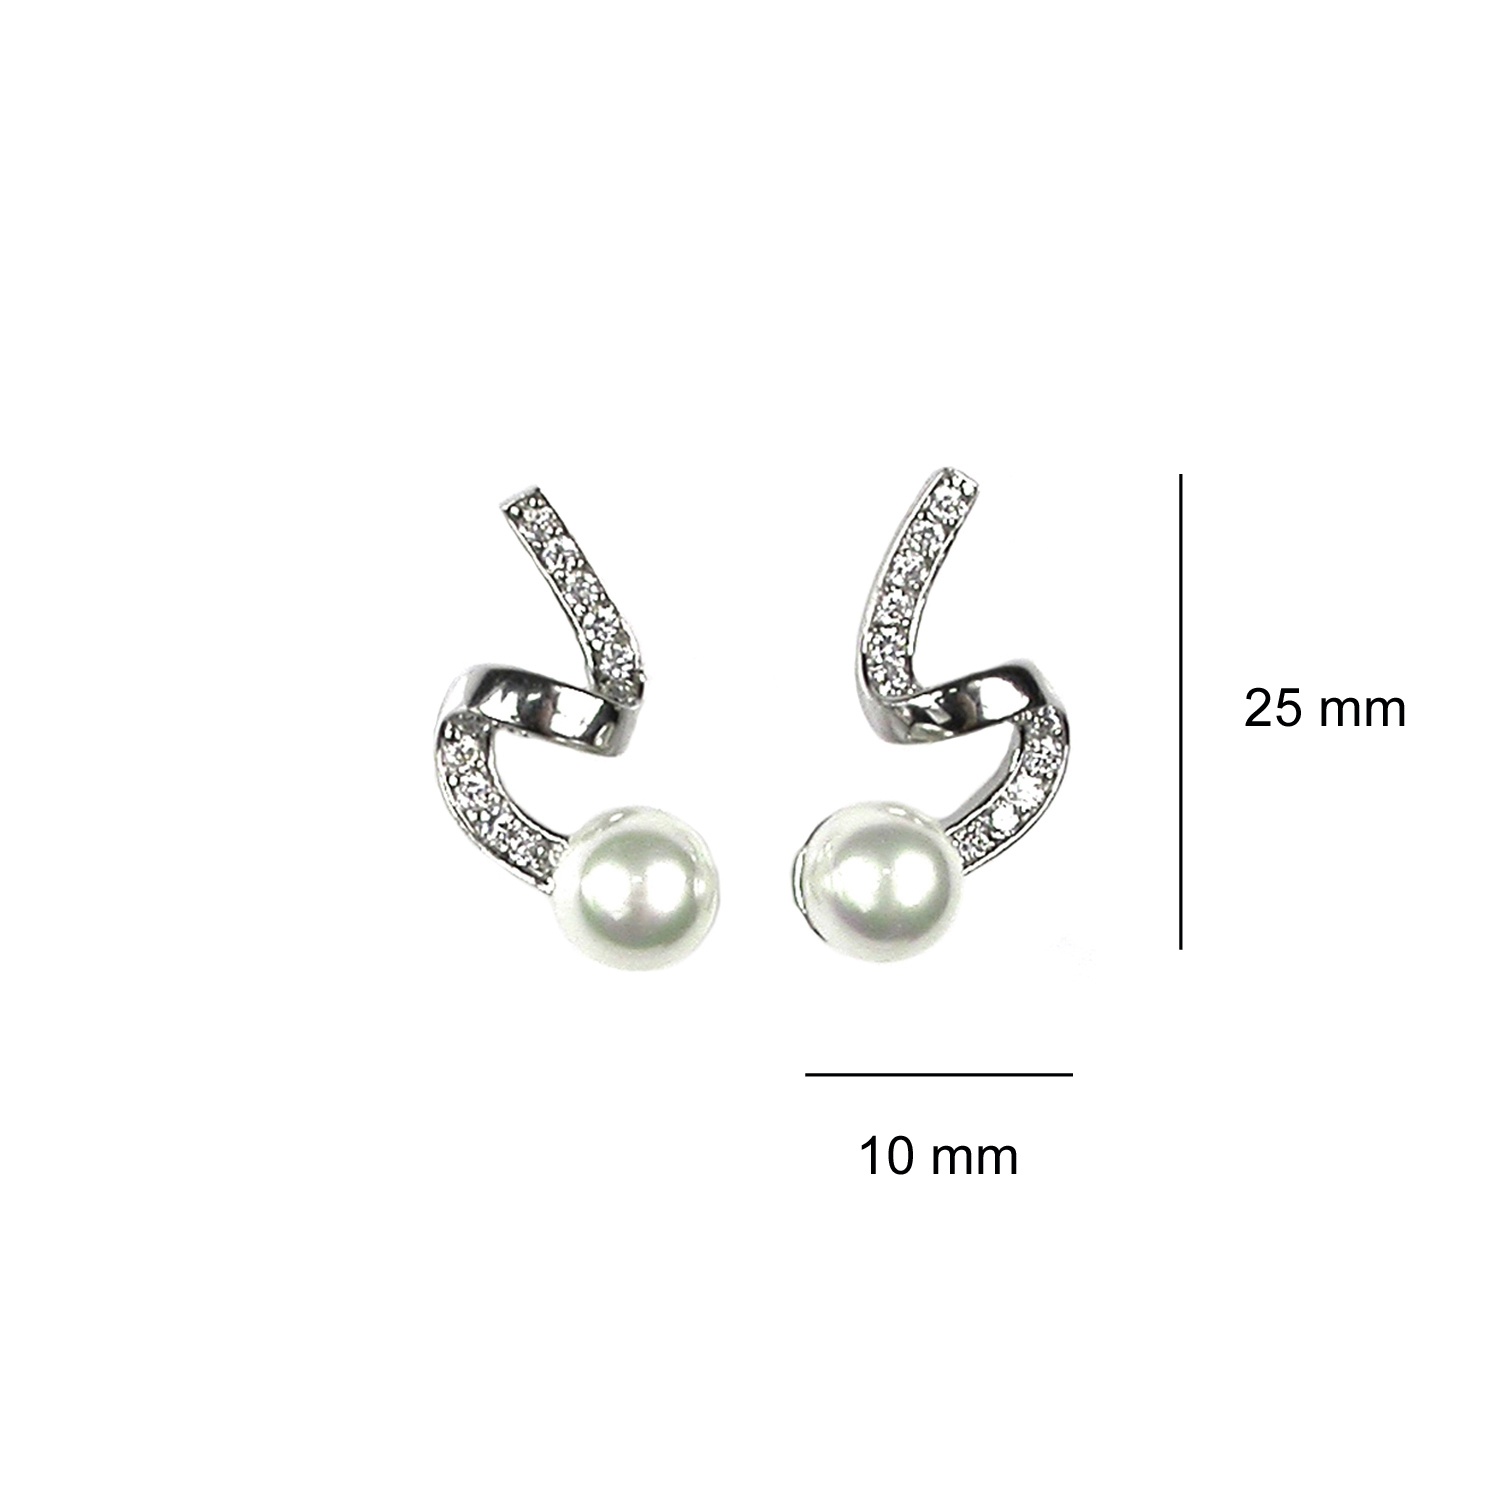 Sterling Silver Earrings with 8 mm. Pearls and Zircons. 3